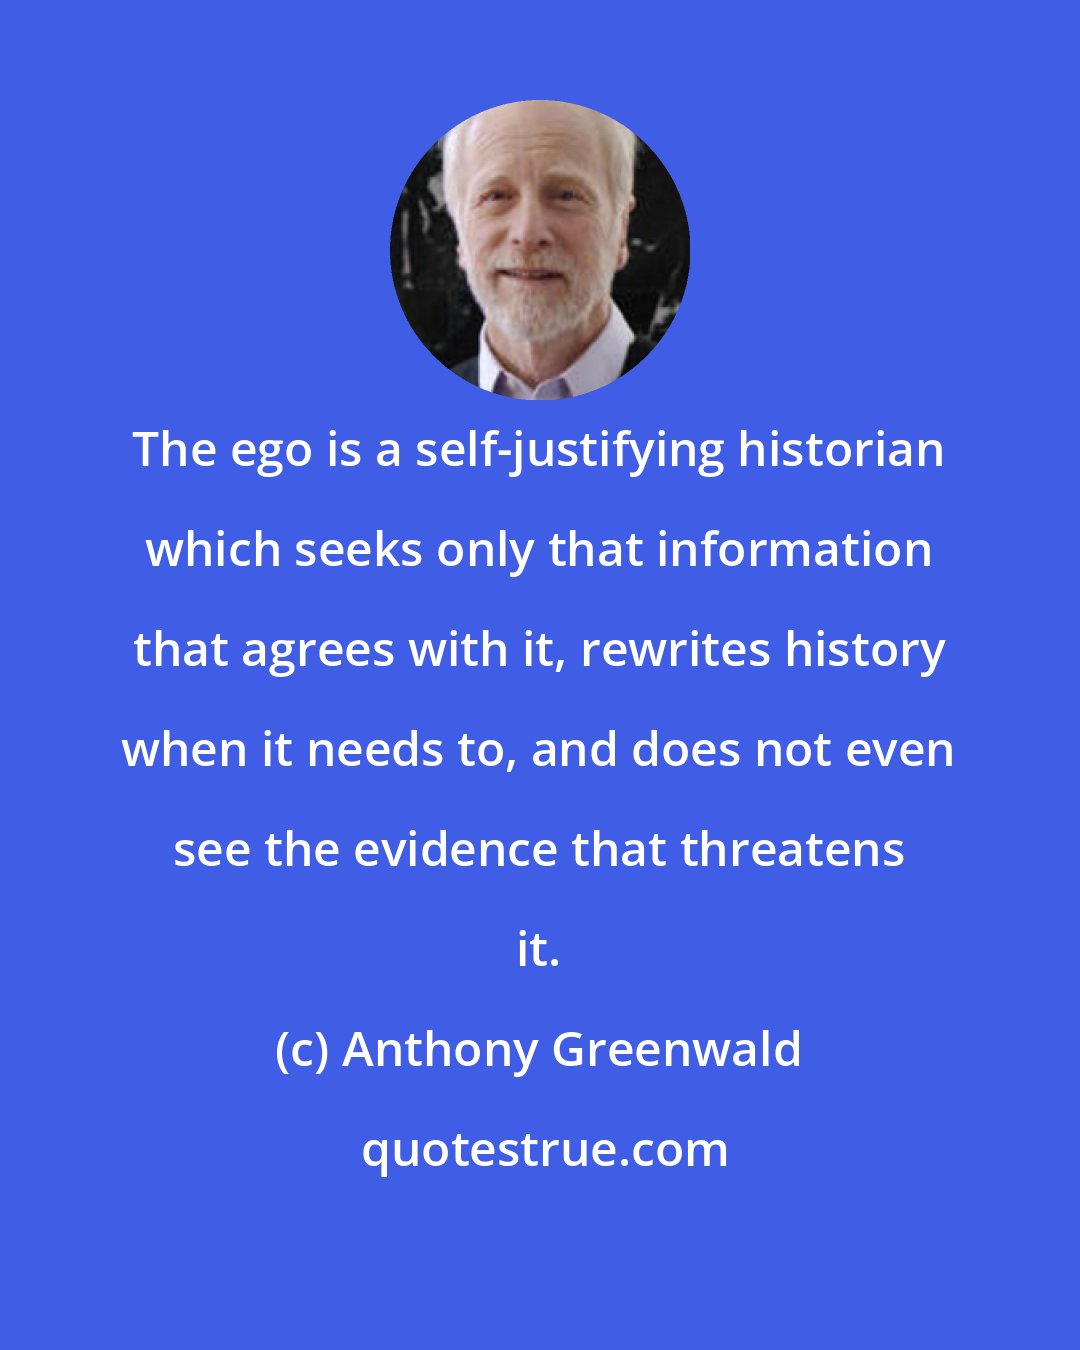 Anthony Greenwald: The ego is a self-justifying historian which seeks only that information that agrees with it, rewrites history when it needs to, and does not even see the evidence that threatens it.